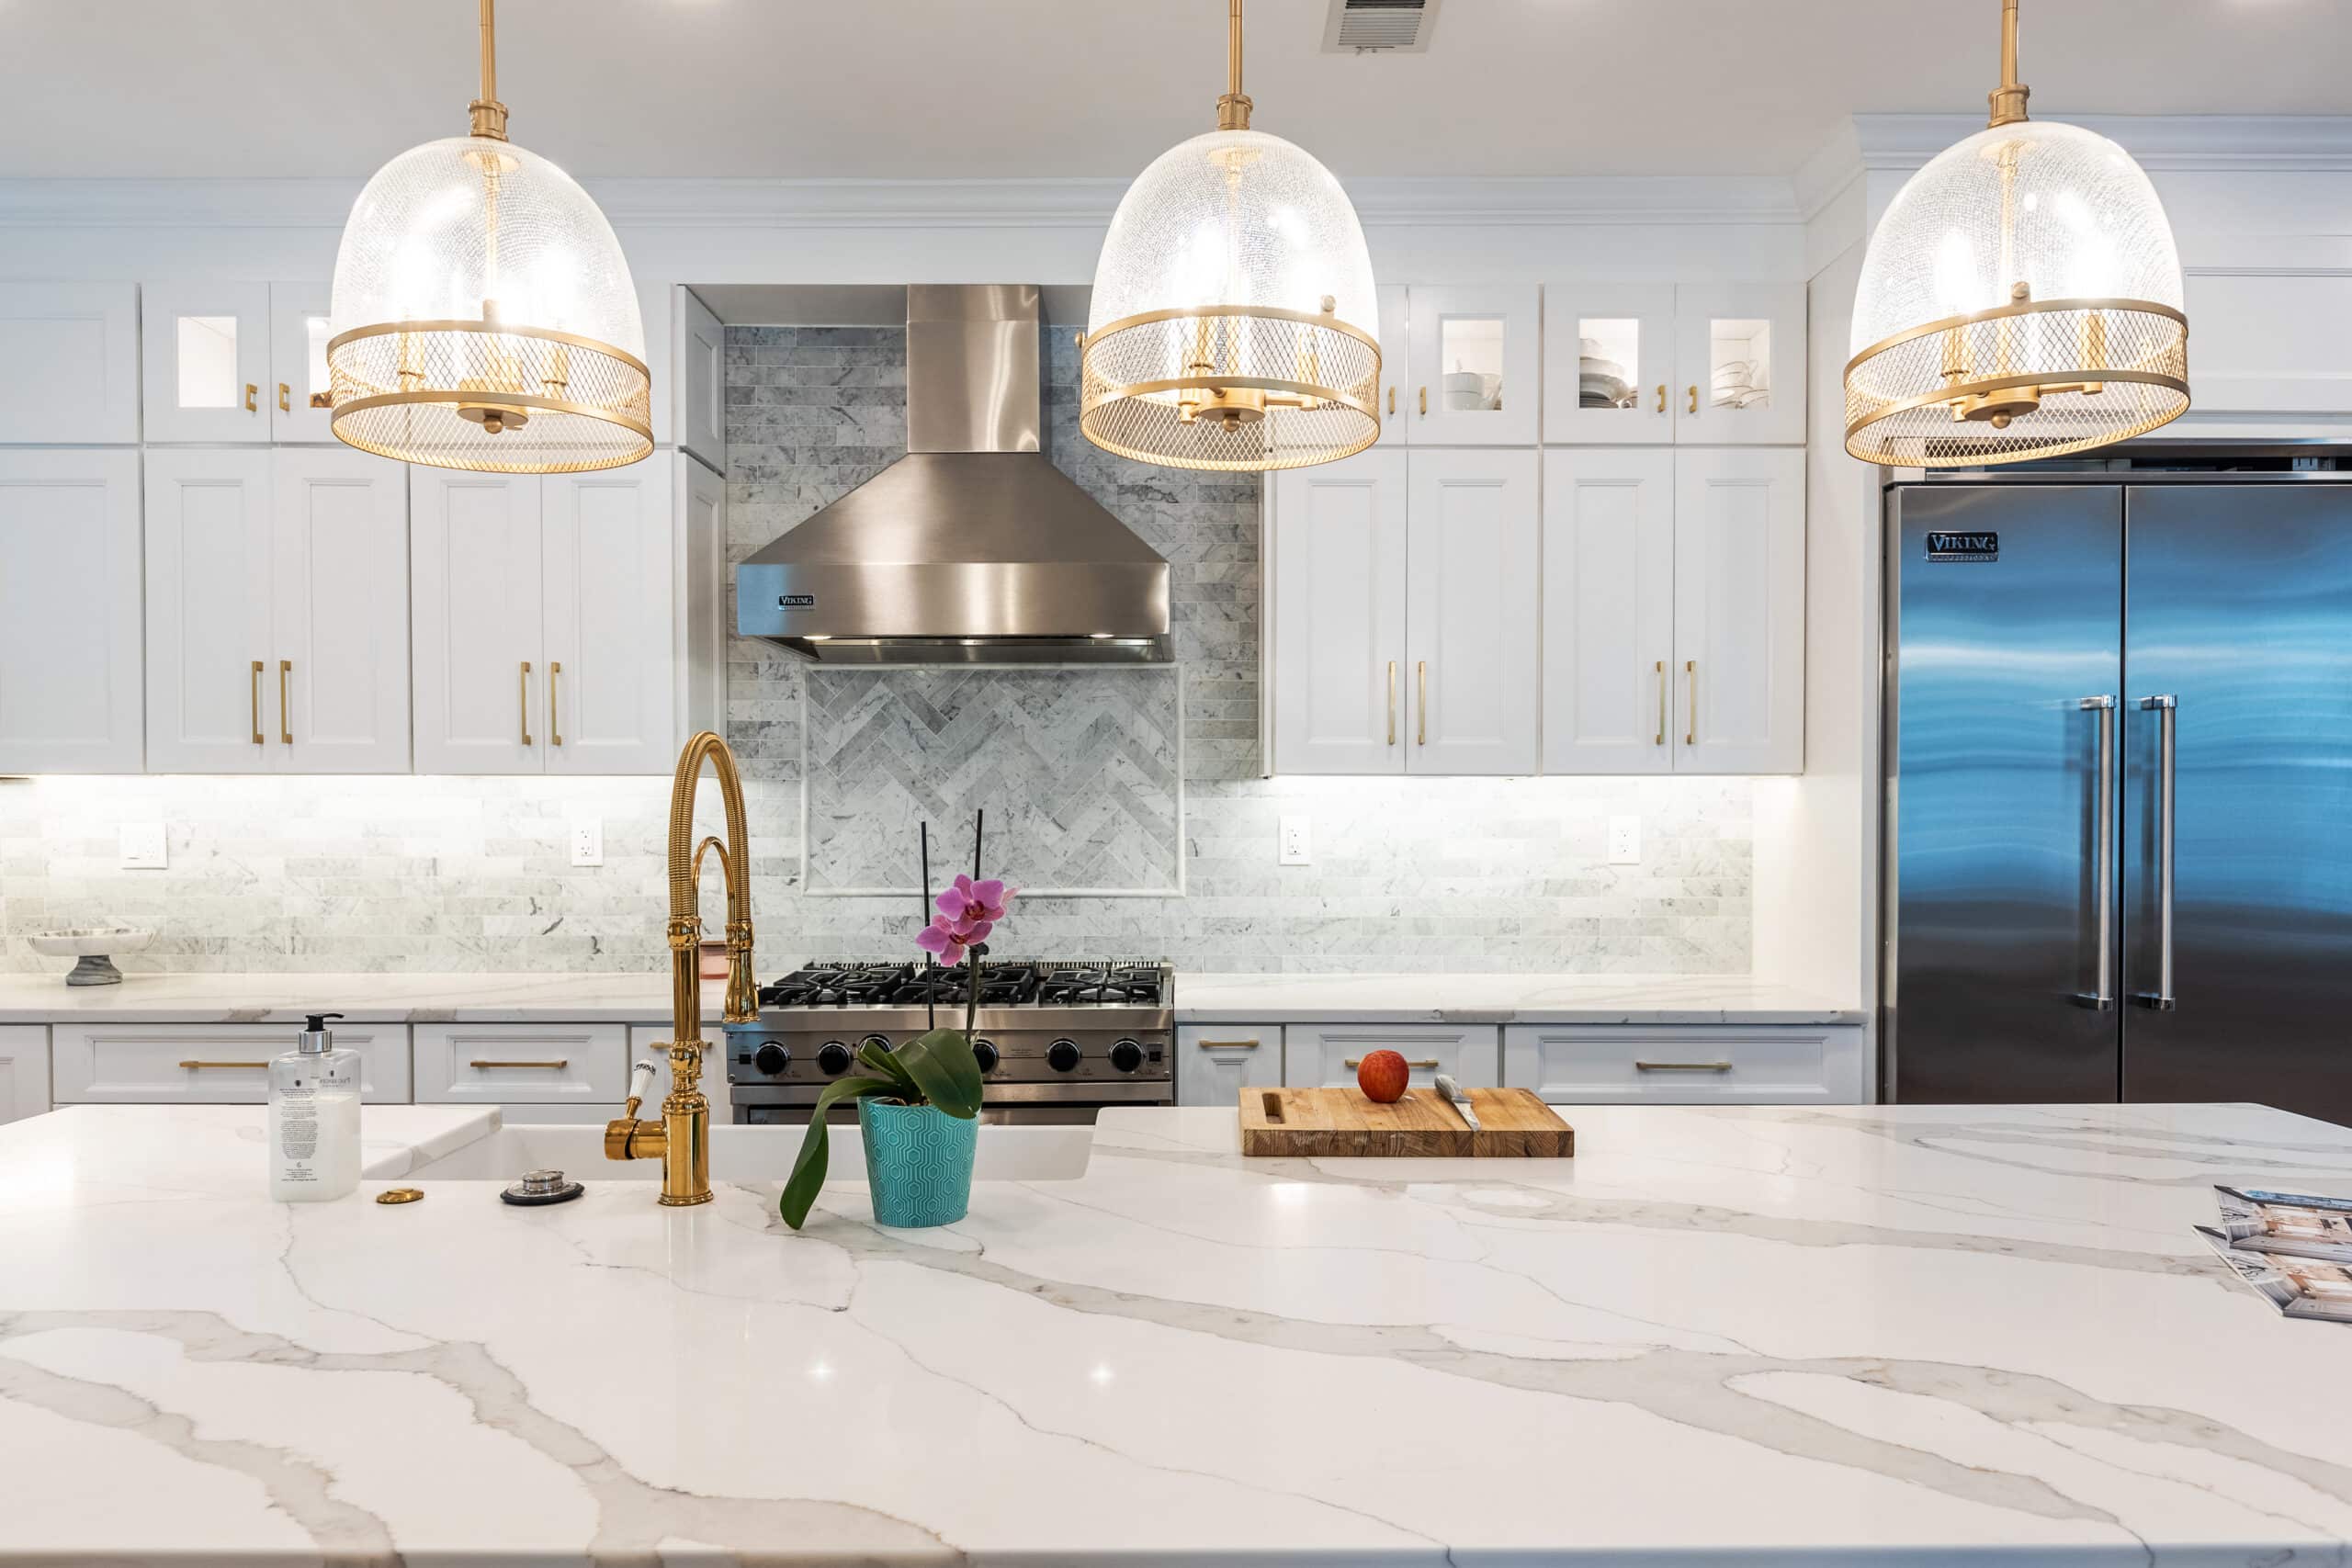 A kitchen with elegant marble counter tops and sleek white cabinets